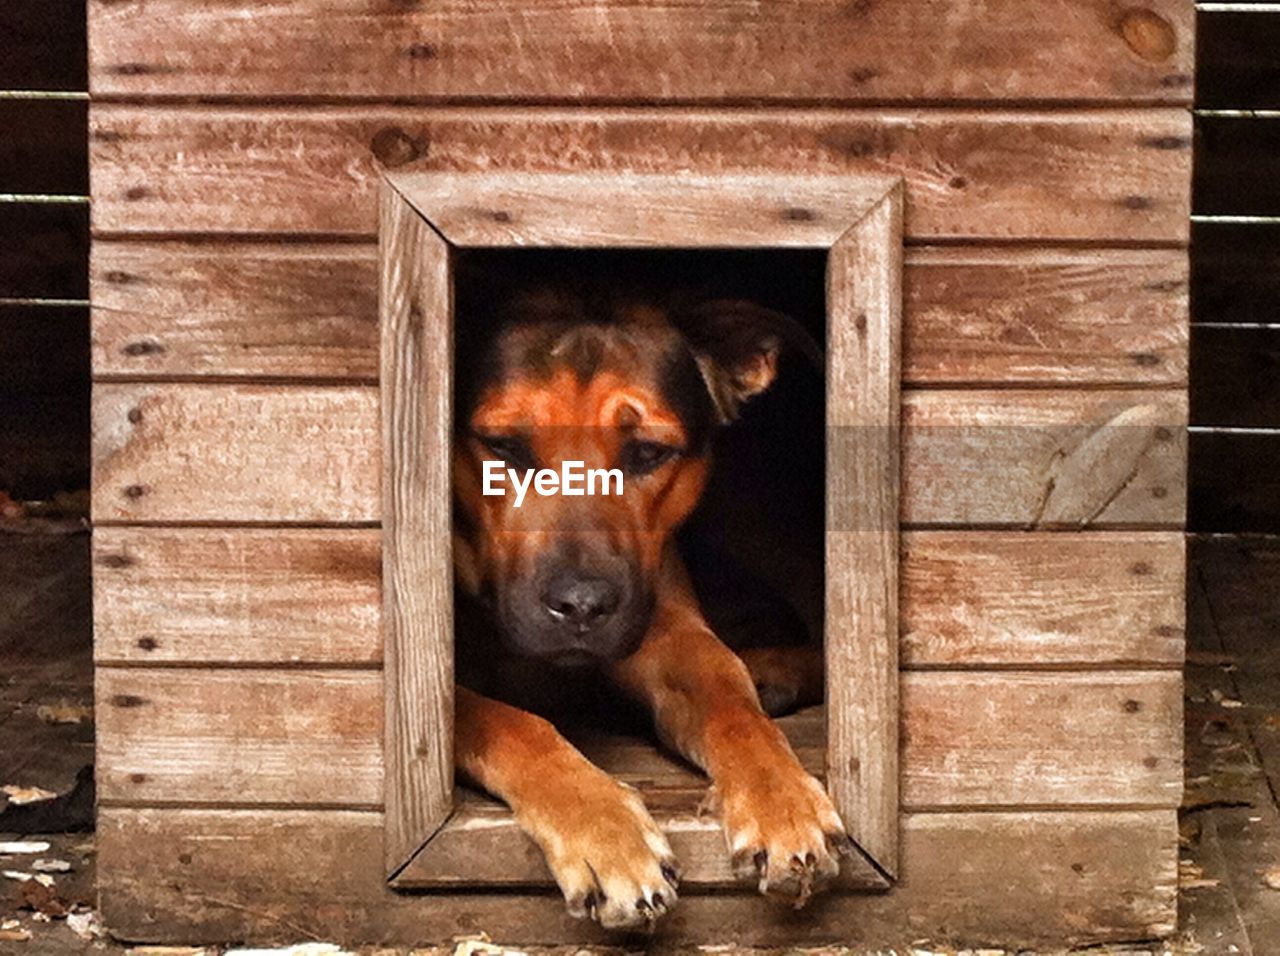 Dog in kennel